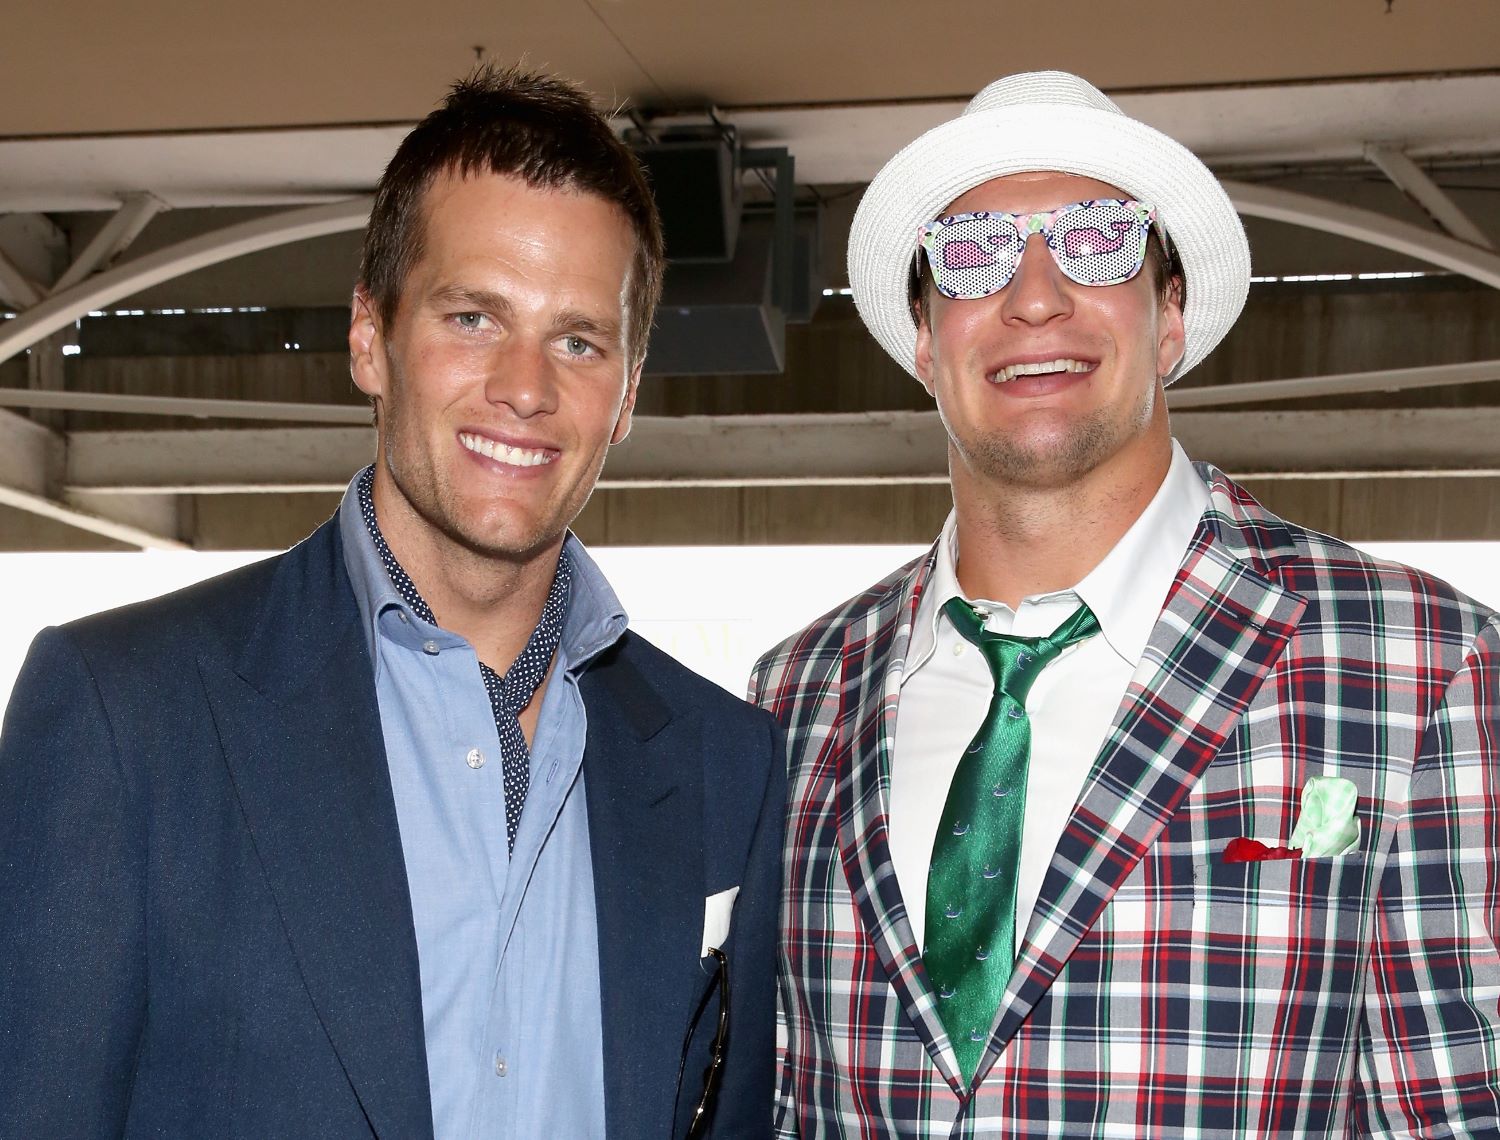 Tom Brady and Rob Gronkowski have shared plenty of memorable moments, but Gronk's favorite memory with Brady involves horses and alcohol.